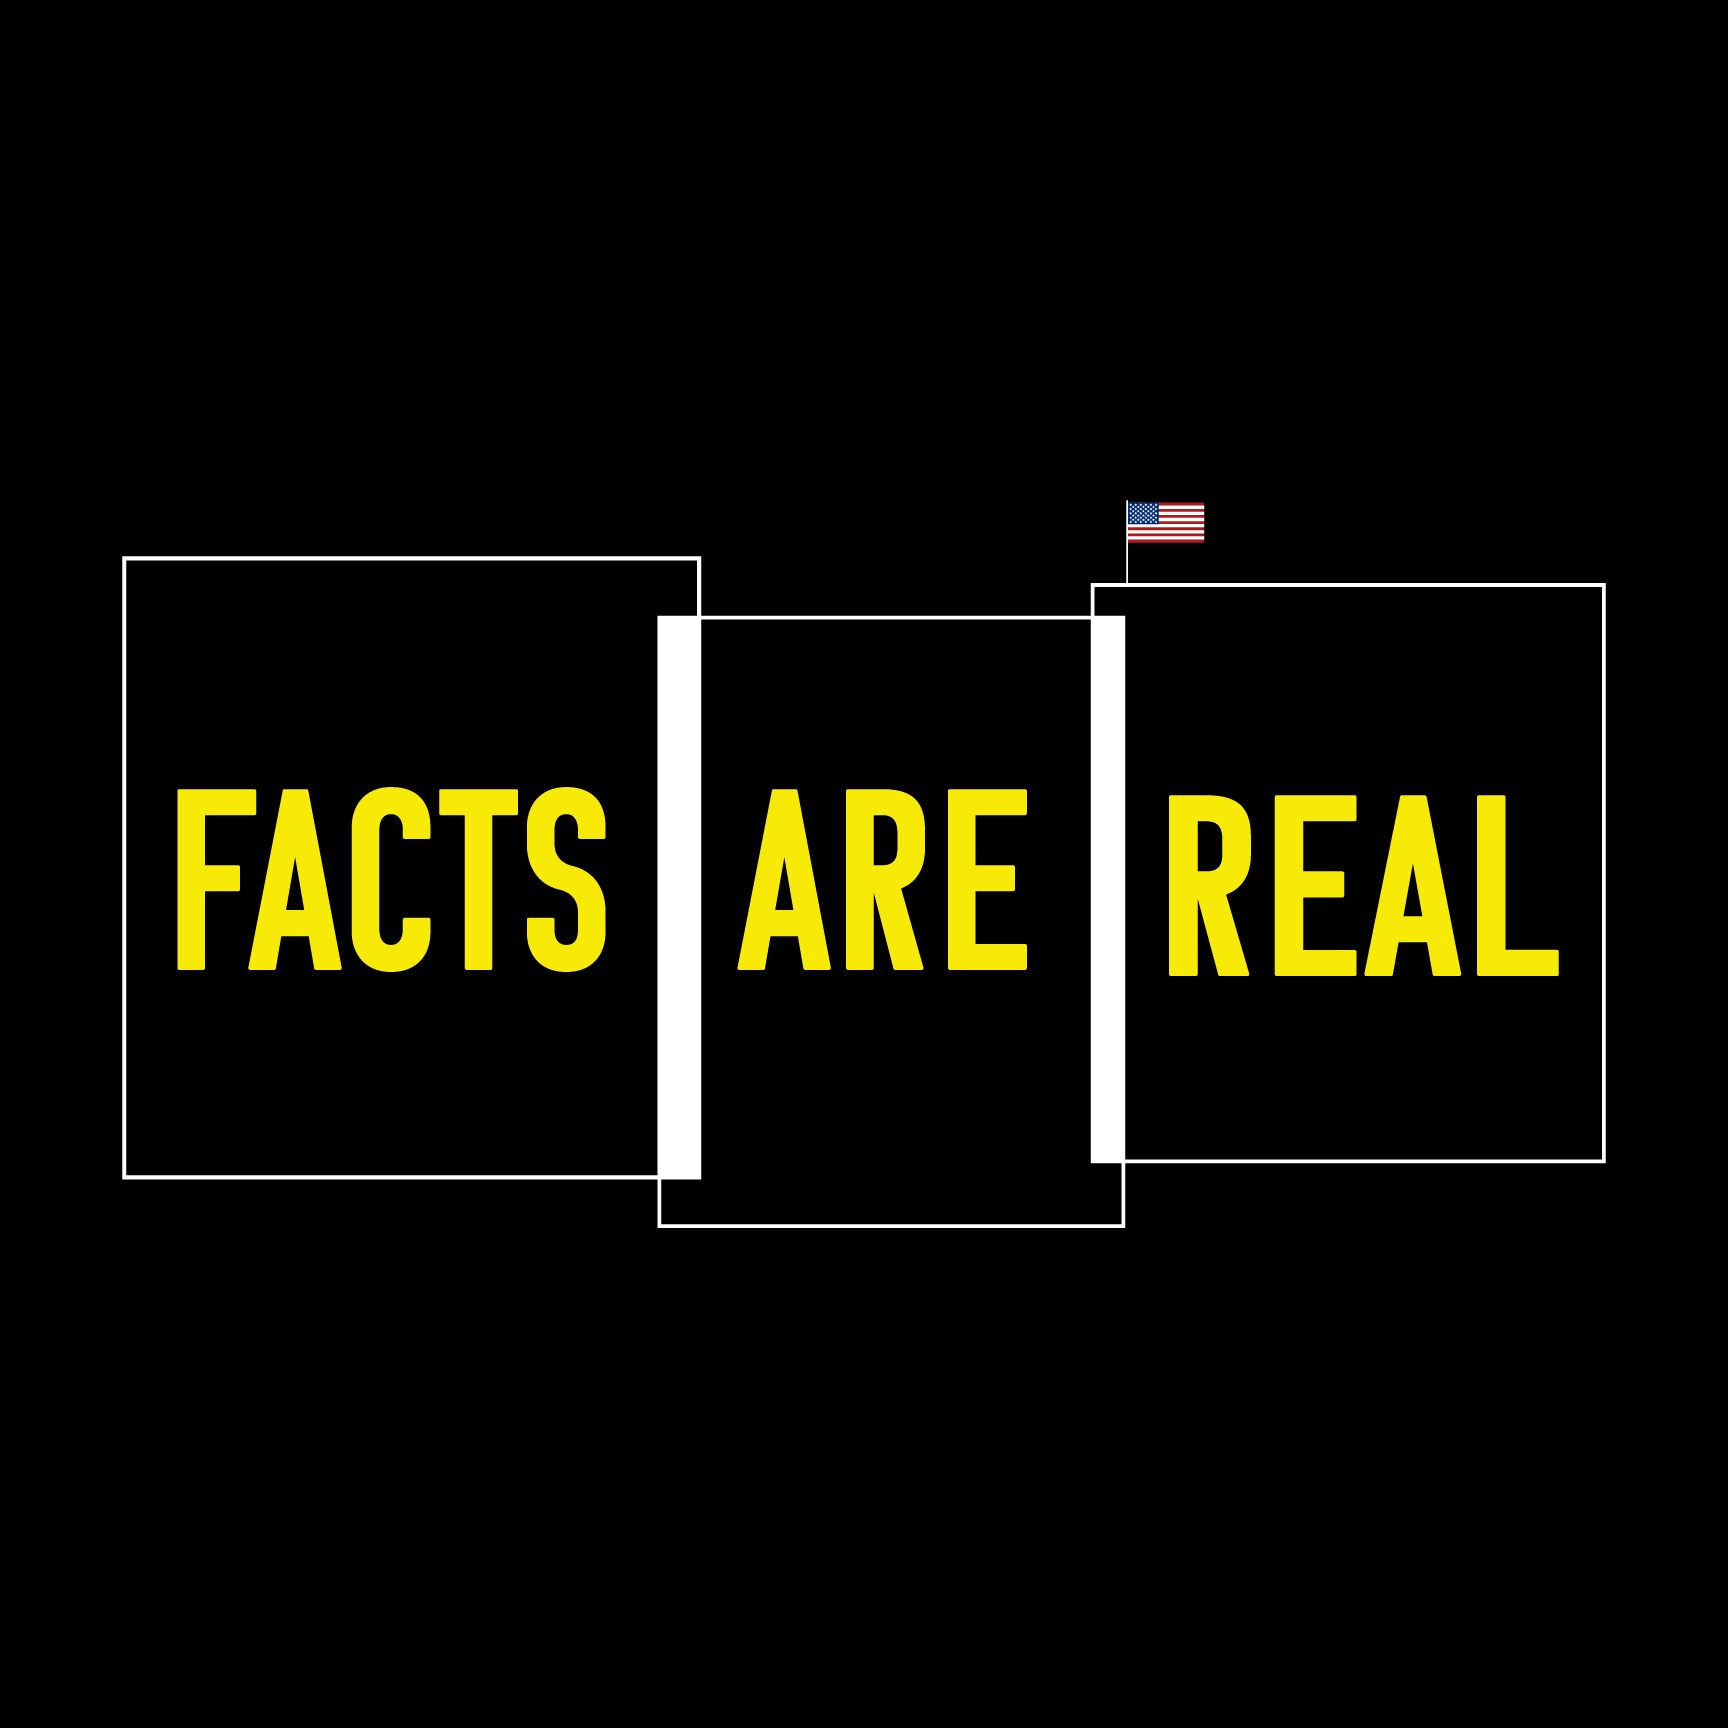 FactsAreReal_promo.png